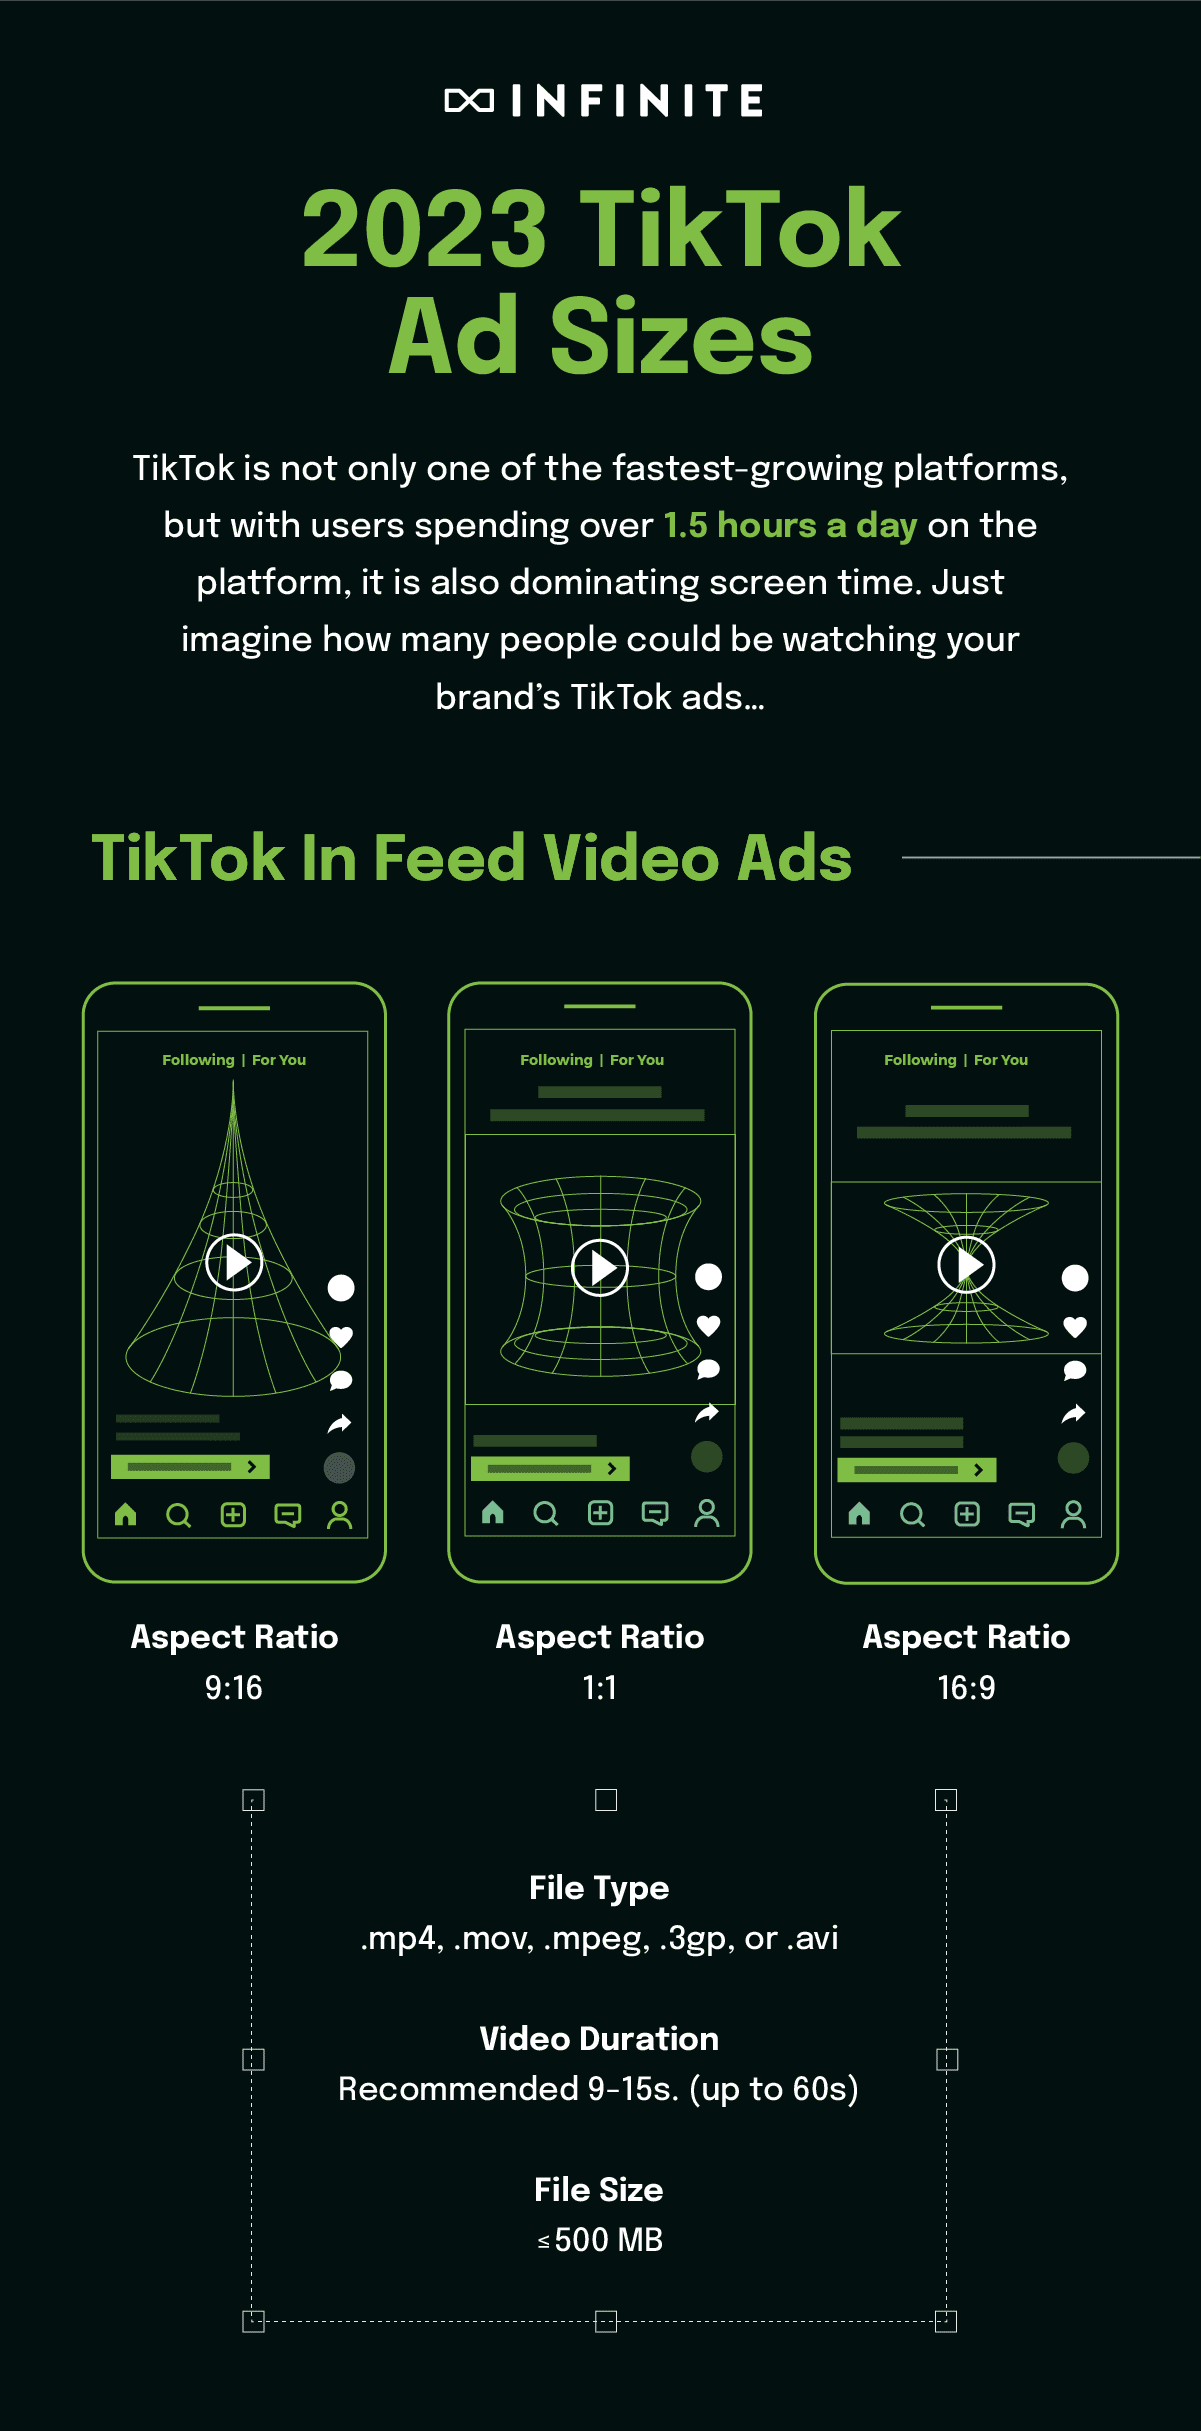 tiktok ad sizes and specs for 2023